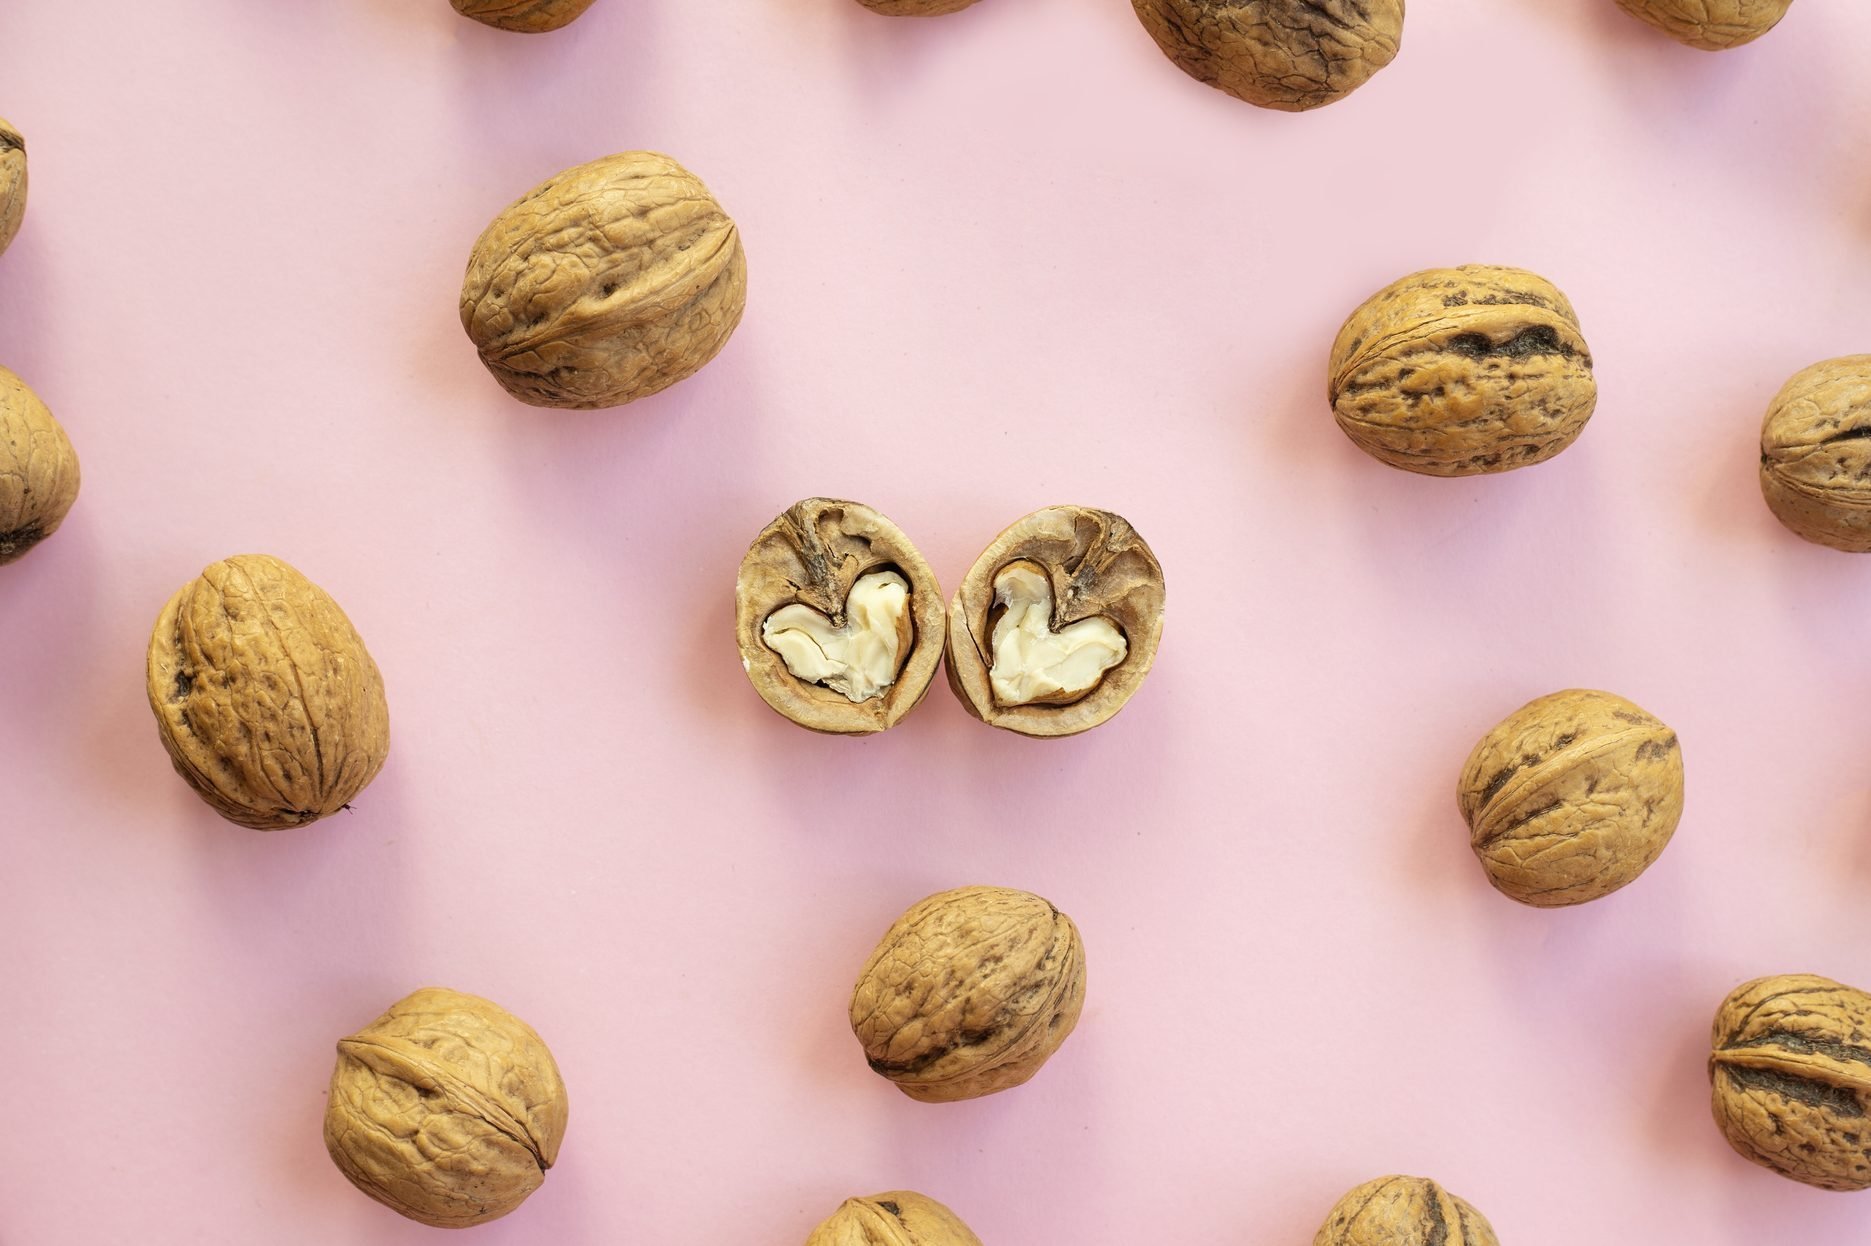 Eating This Nut May Reduce Heart Disease Risk, New Study Says